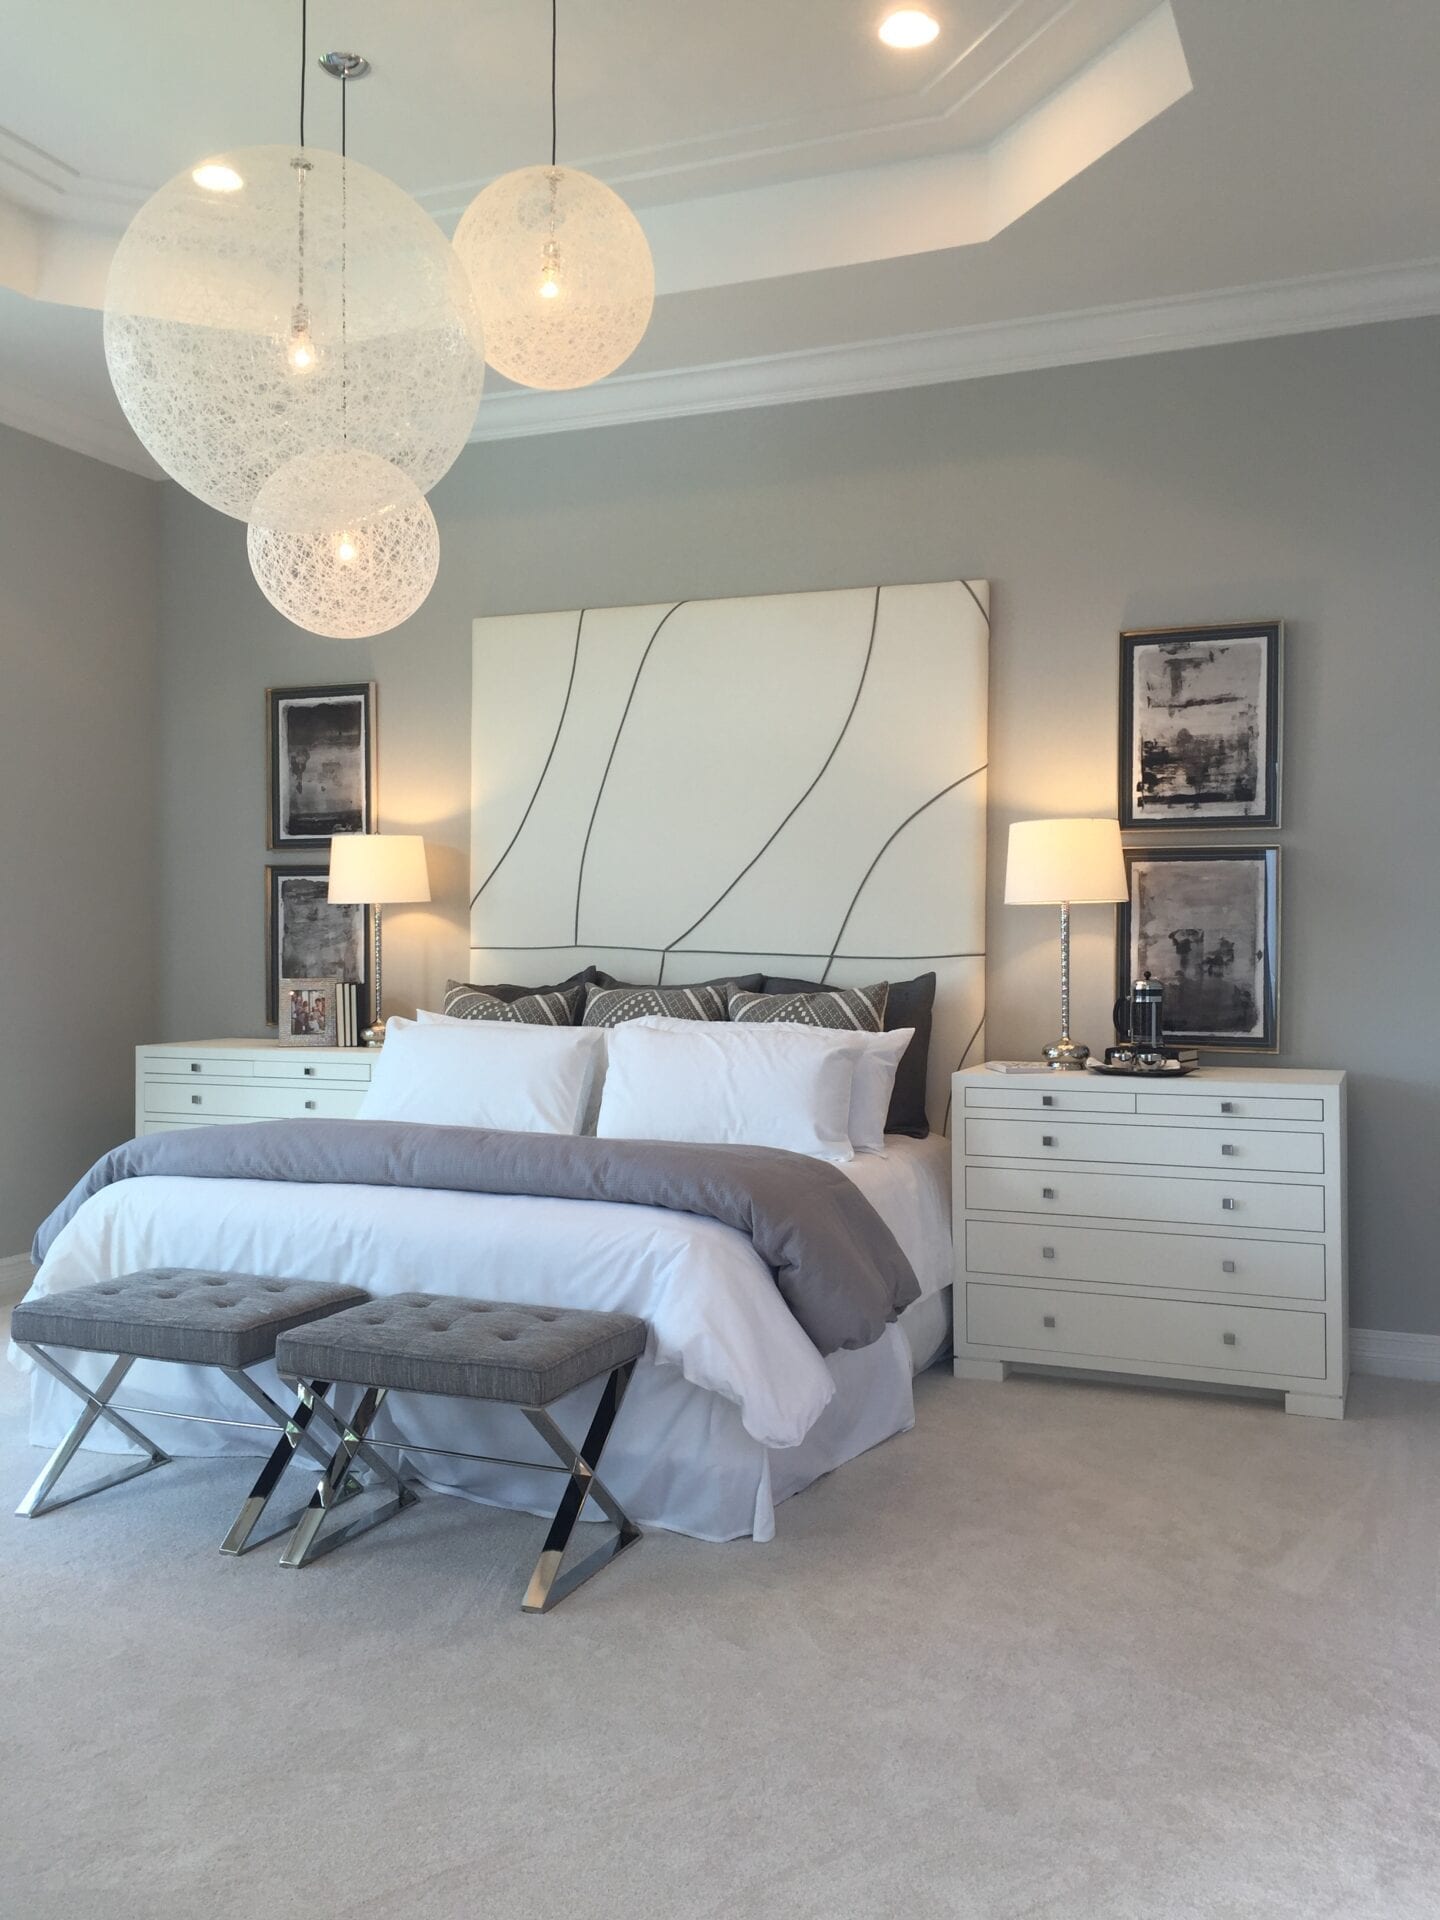 custom upholstered bed​ and luxury wall mounted headboards​